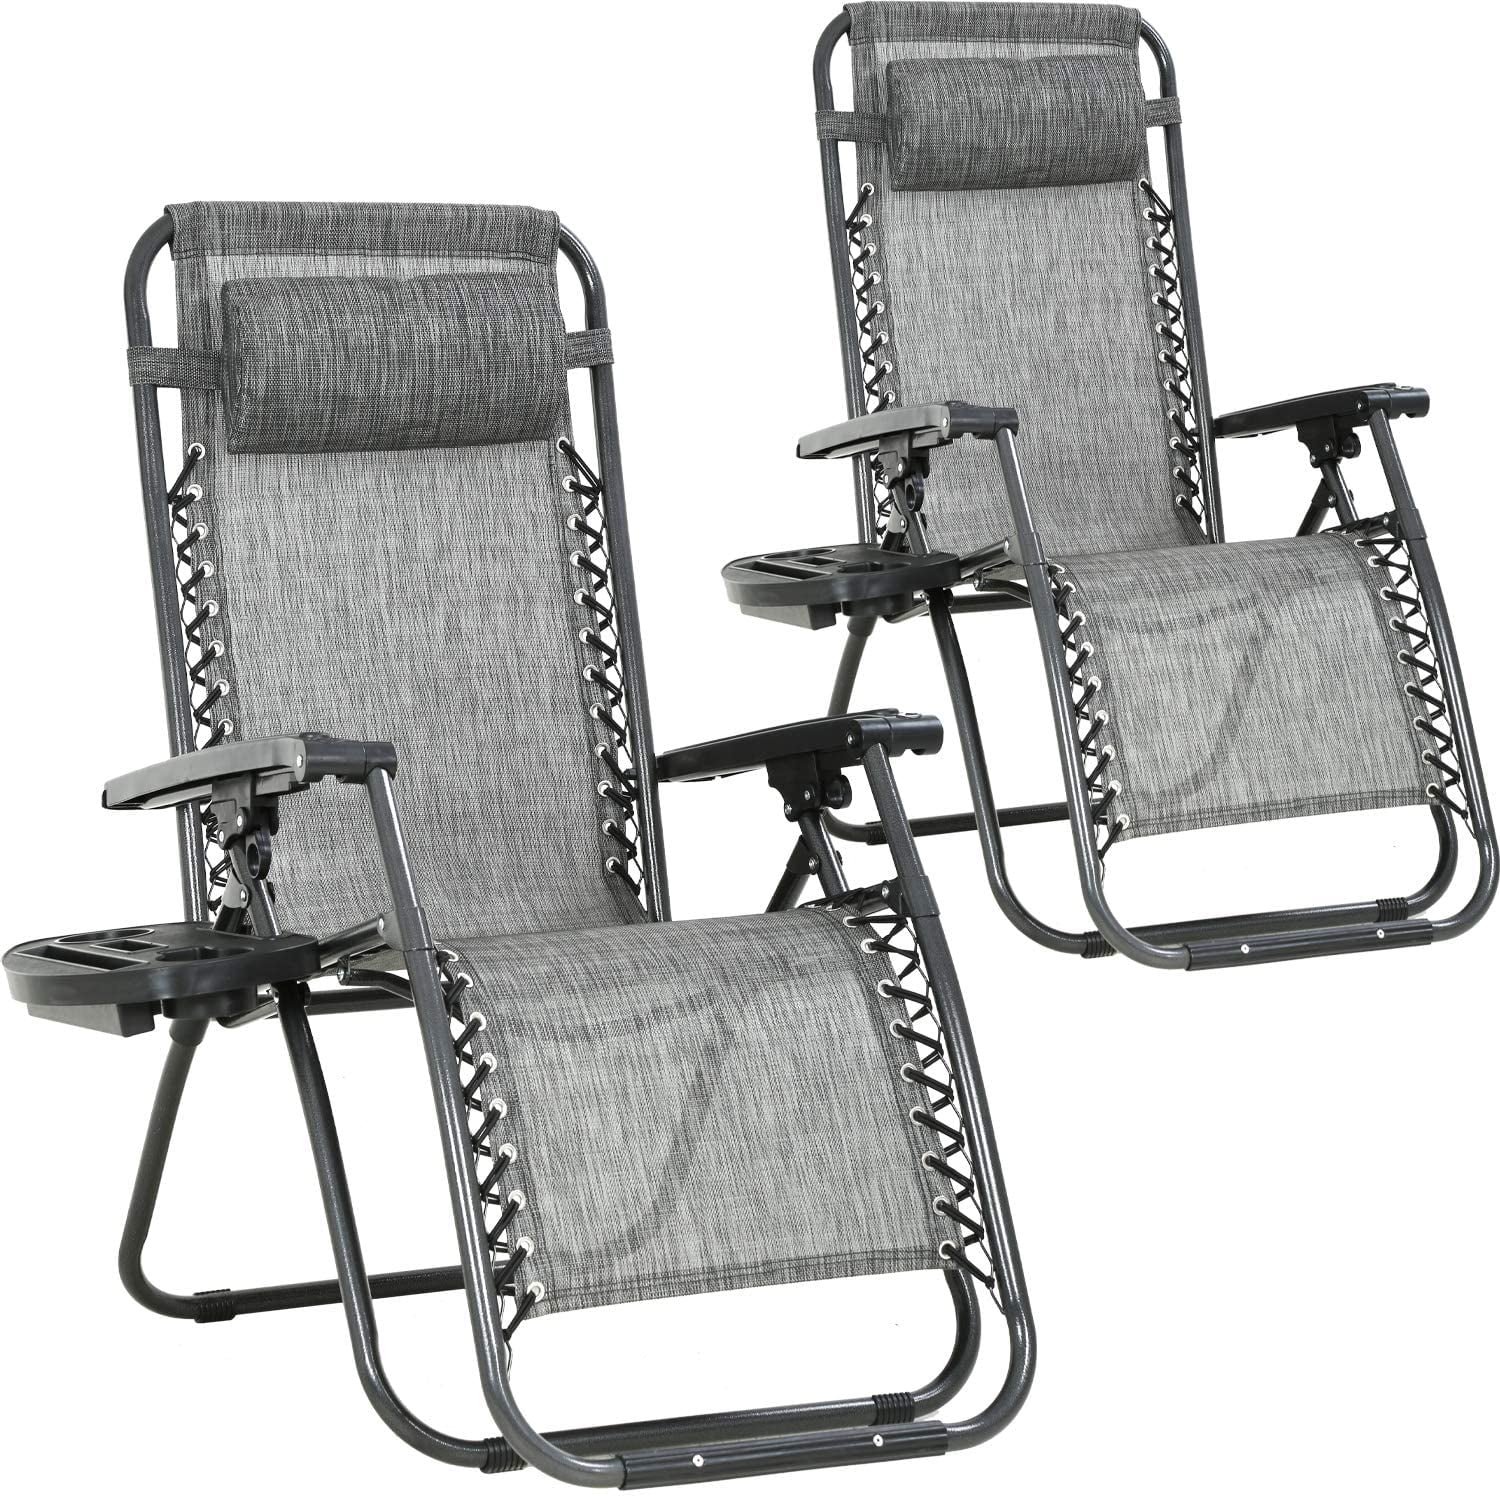 Zero Gravity Chair Patio Chairs Set of 2 Lawn Chair Outdoor Chair Deck Chairs Camping Chairs ...